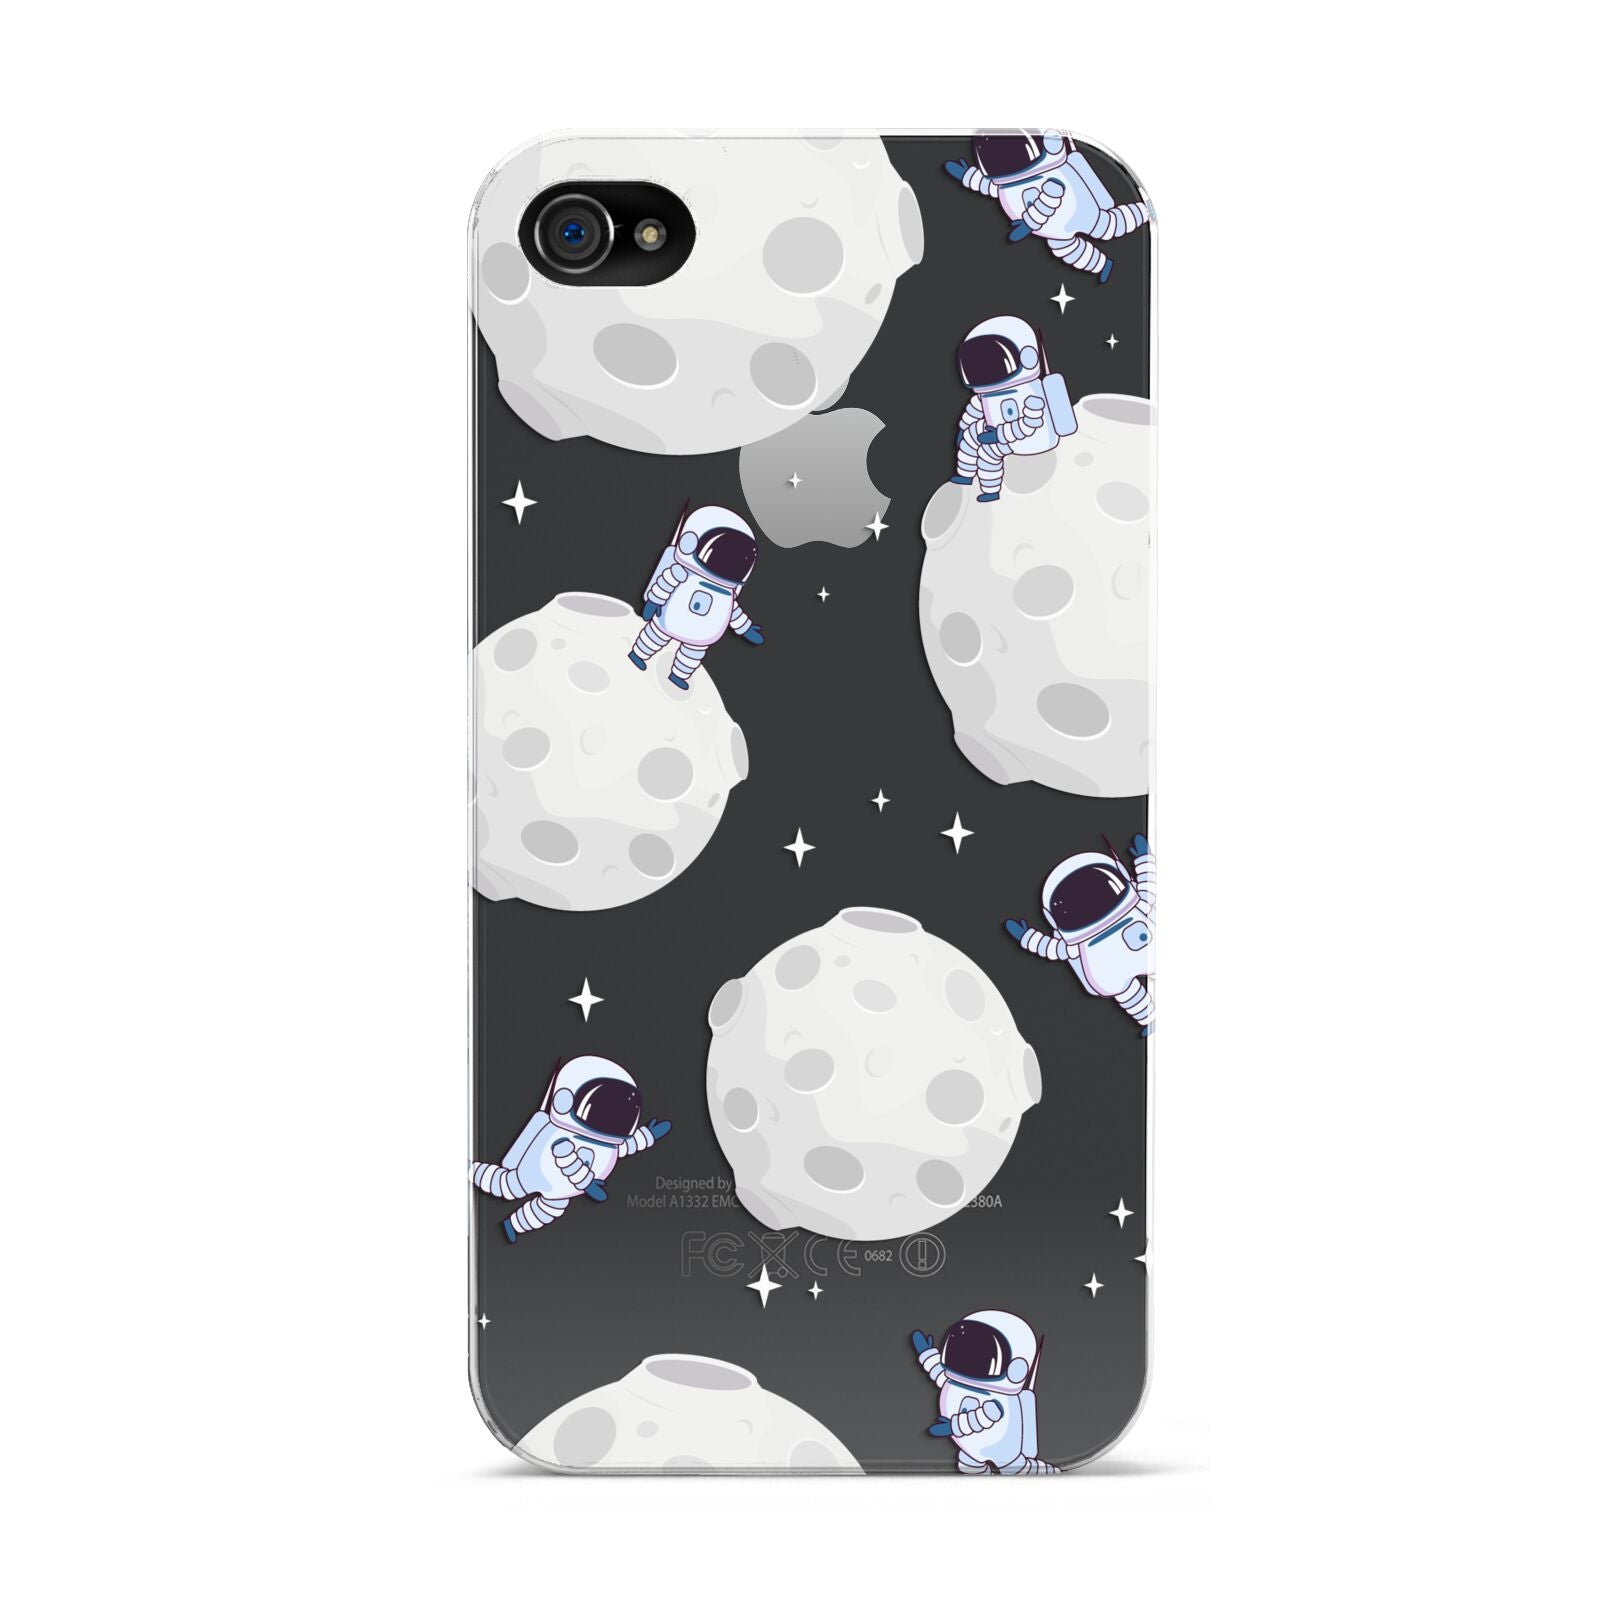 Astronauts and Asteroids Apple iPhone 4s Case